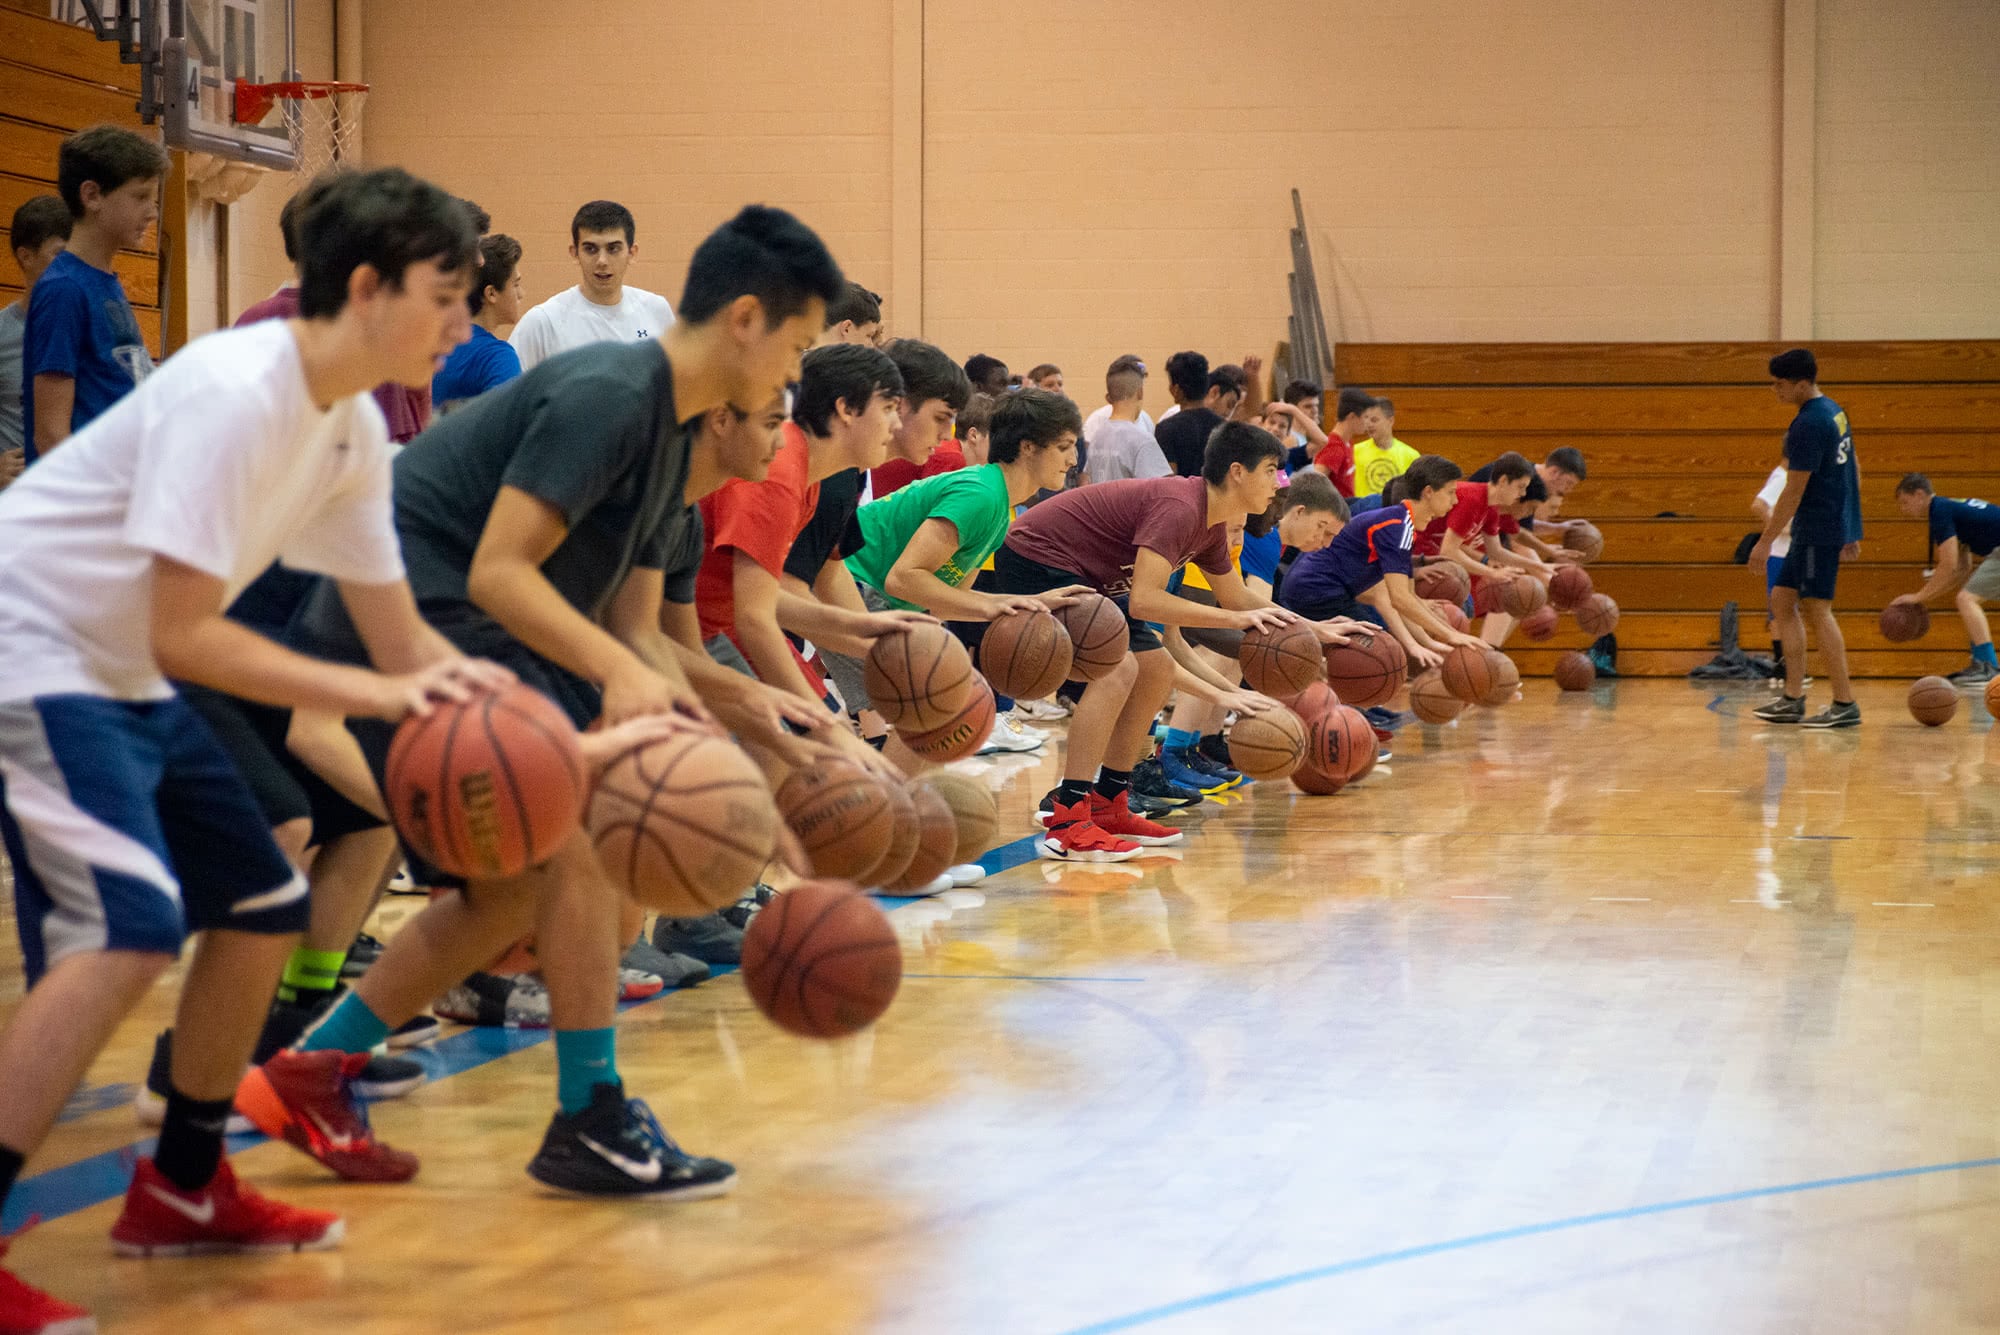 Boys lined up dribbling basketballs in the PCC Field House.